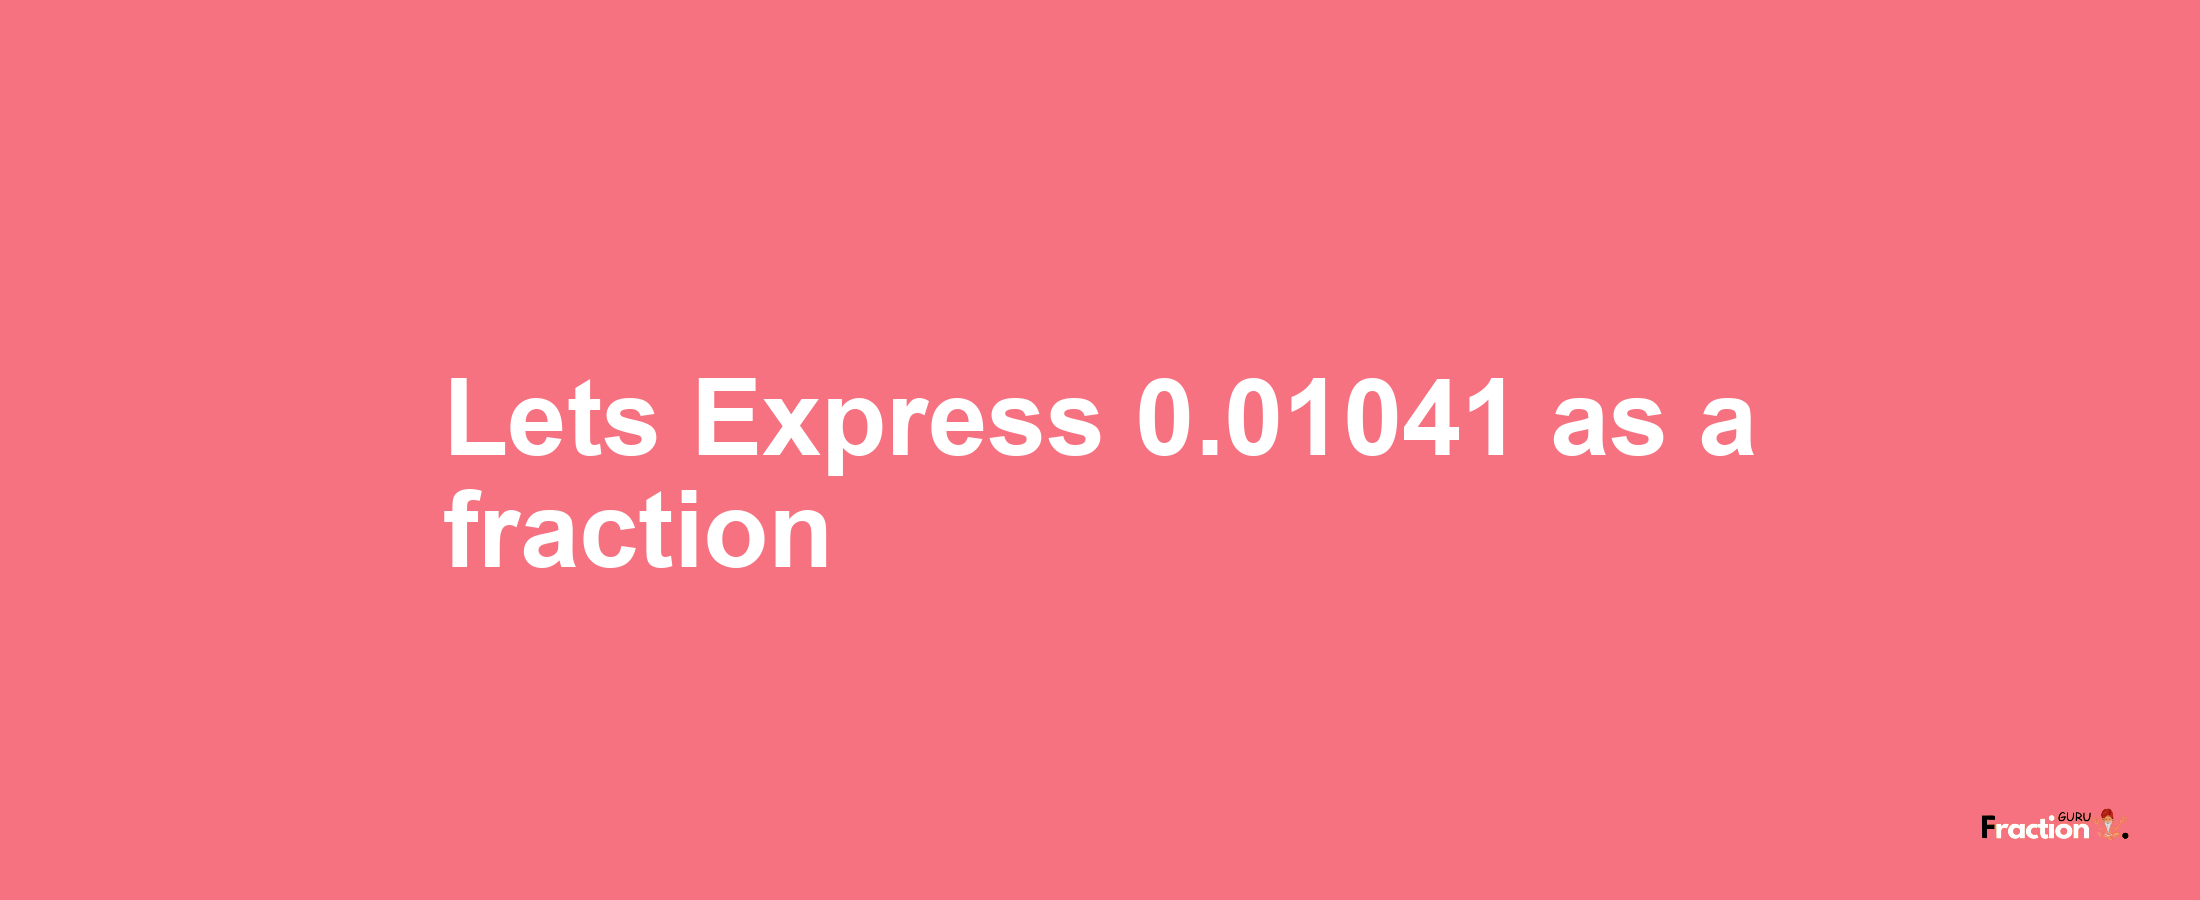 Lets Express 0.01041 as afraction